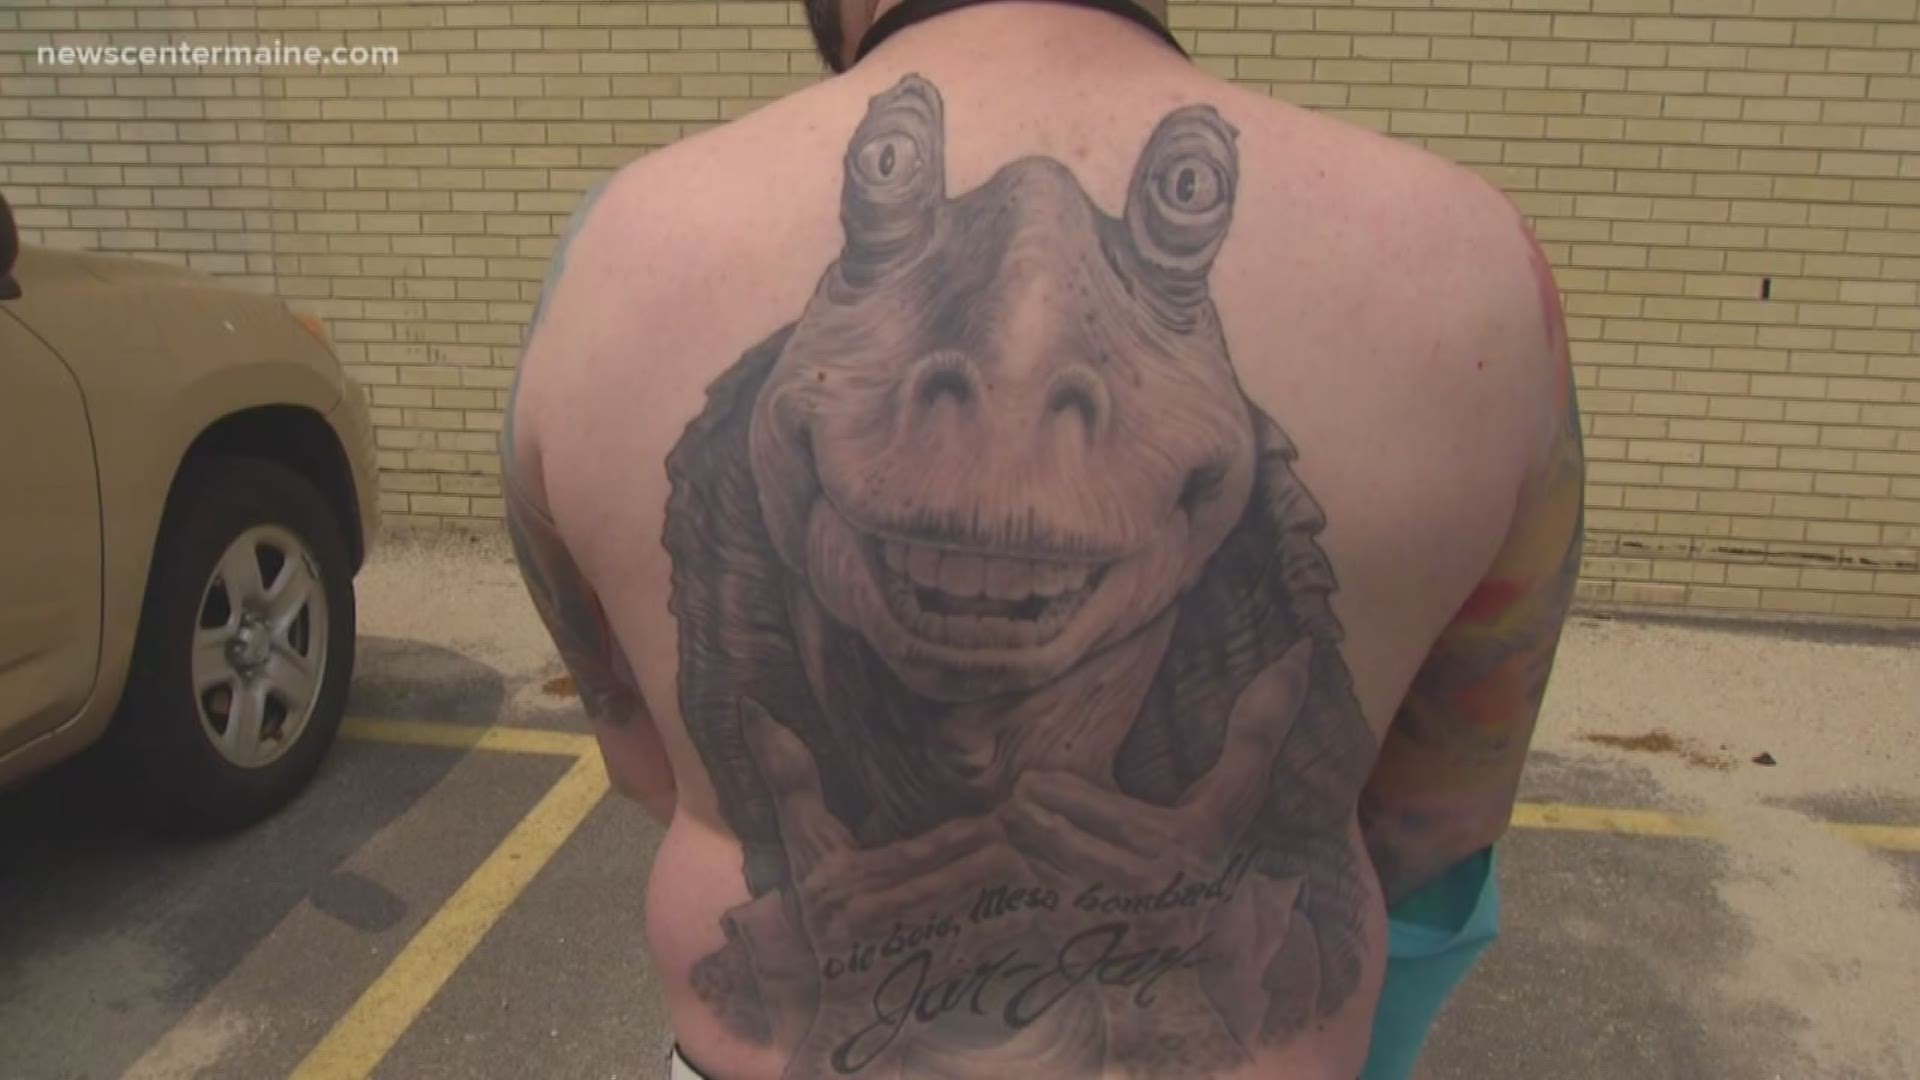 This Star Wars fan took his love for the series to a whole new level.